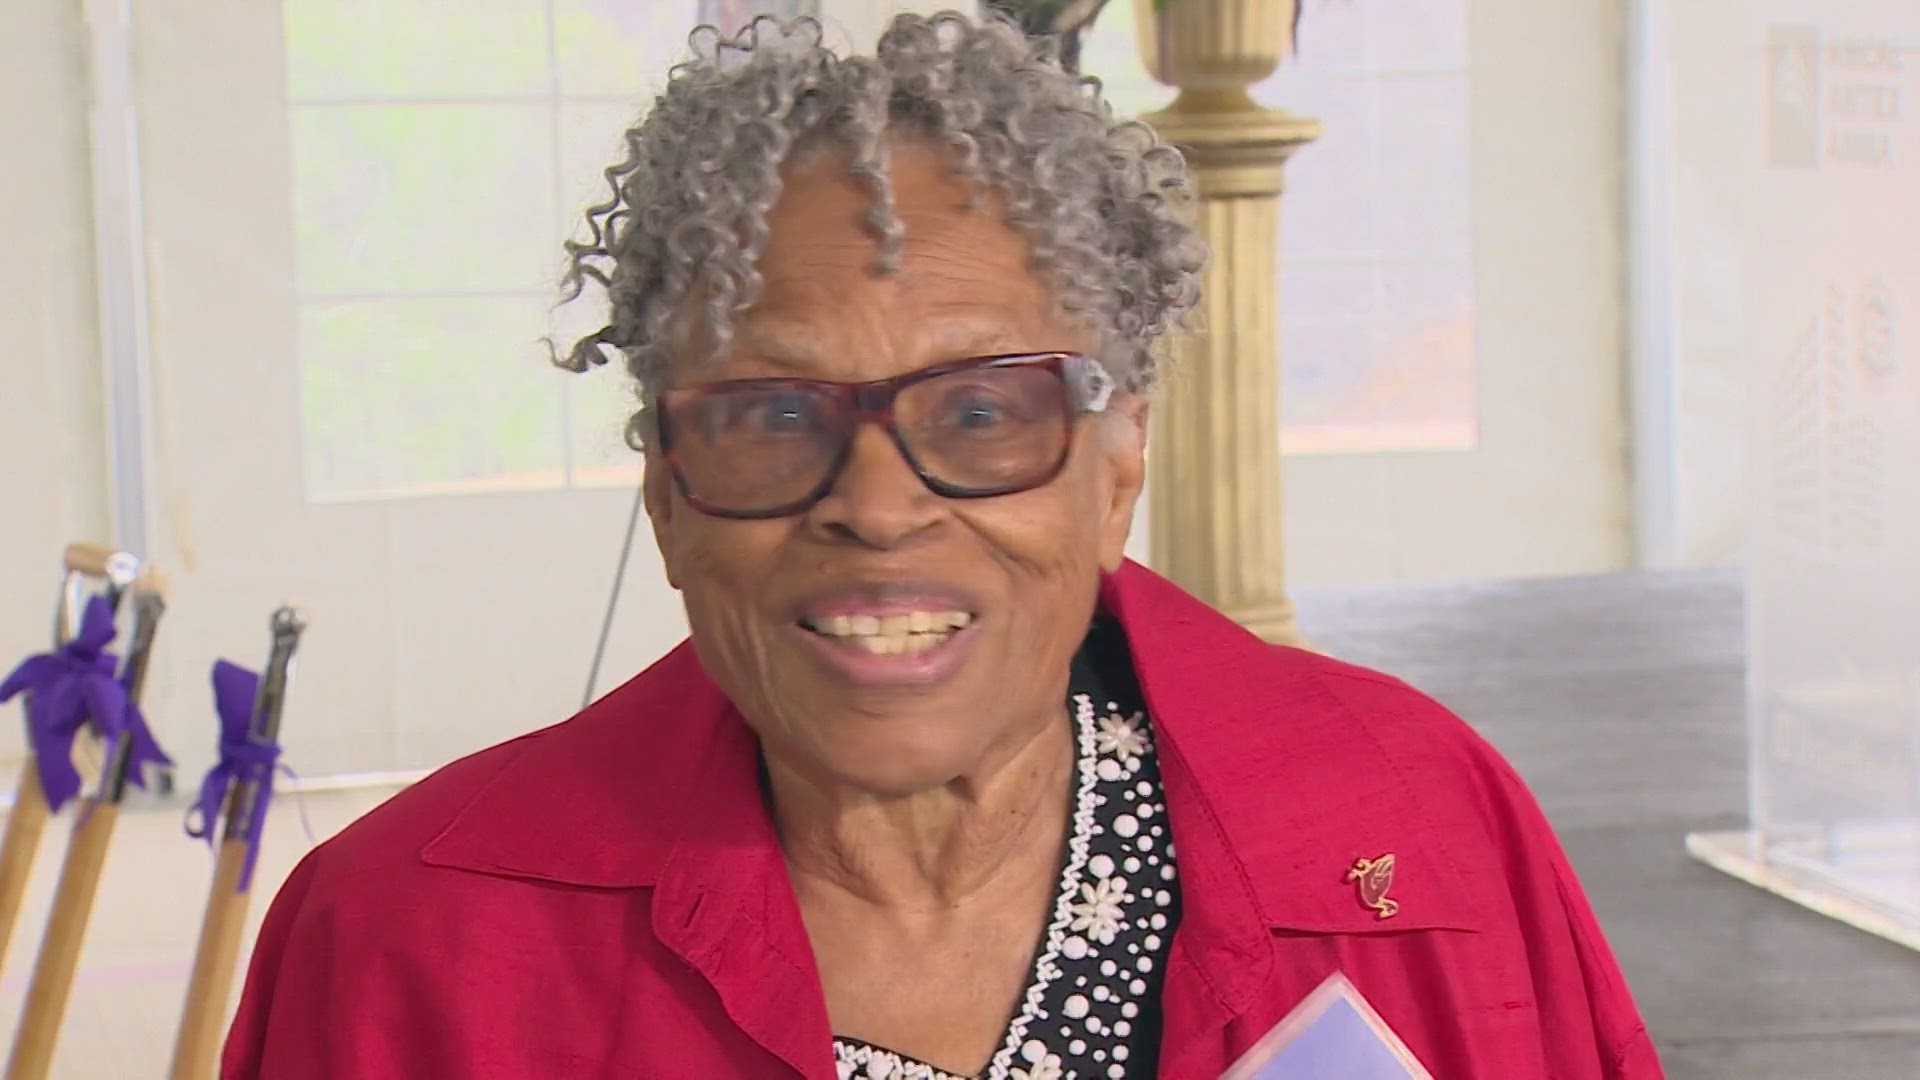 The National Juneteenth Museum is a dream come true for the "Grandmother of Juneteenth," Ms. Opal Lee, who also fought for Juneteenth to become a national holiday.